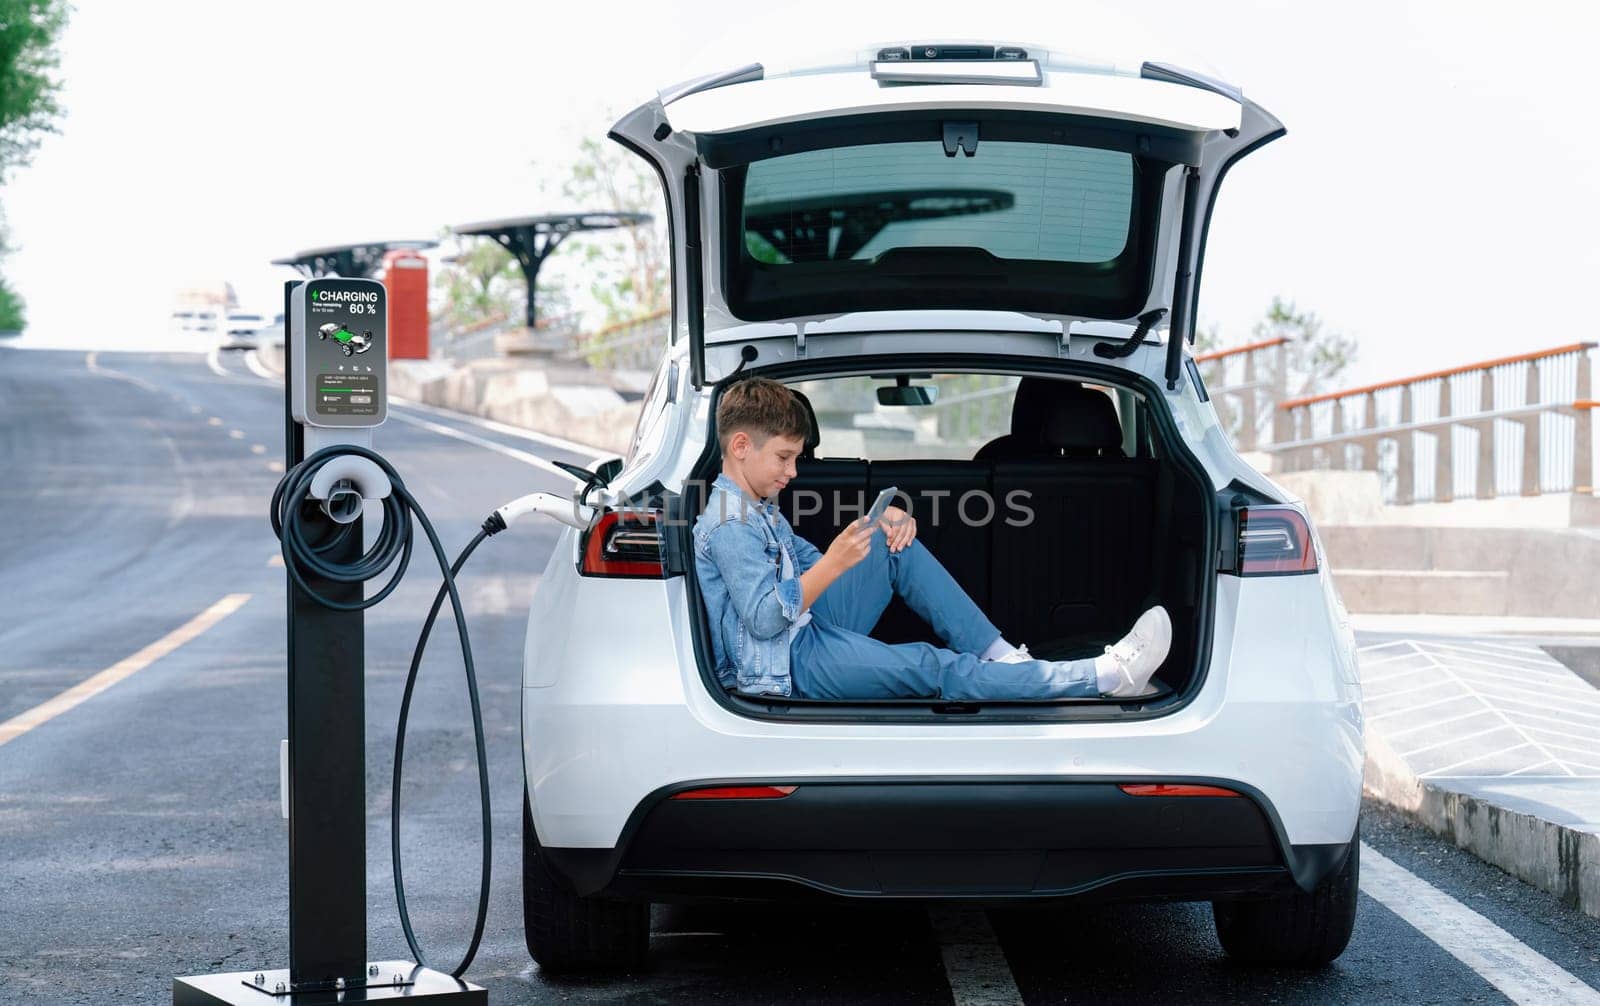 Little boy sitting on car trunk, using smartphone while recharging eco-friendly car from EV charging station. EV car road trip travel as alternative vehicle using sustainable energy concept. Perpetual